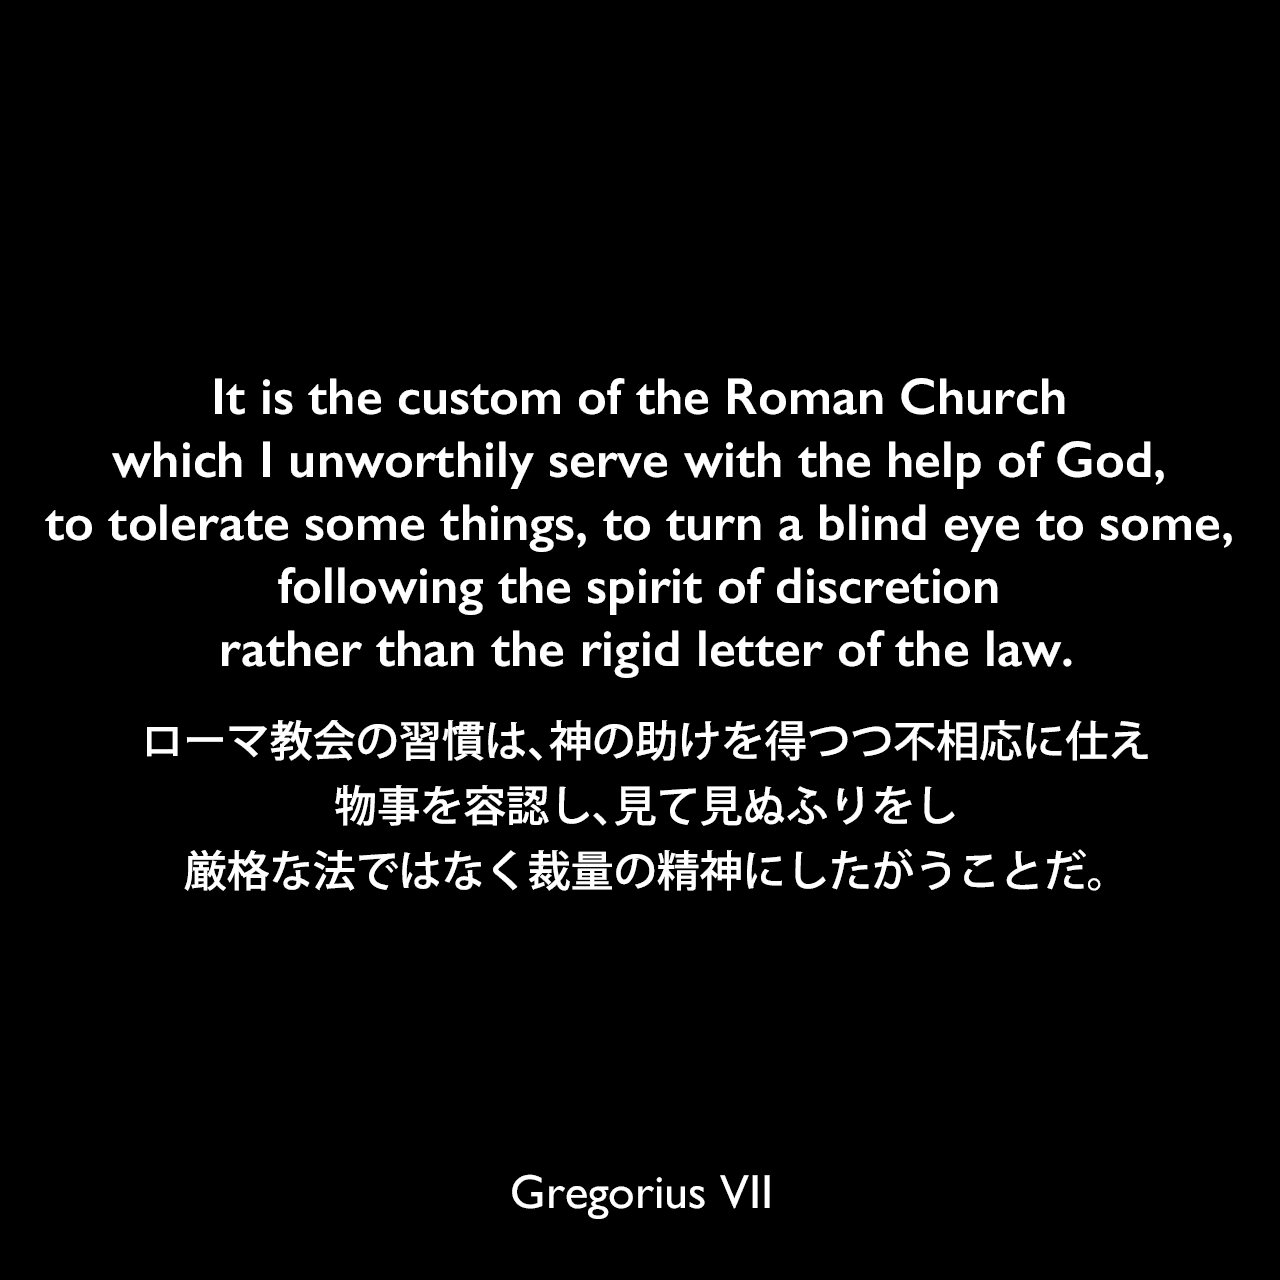 It is the custom of the Roman Church which I unworthily serve with the help of God, to tolerate some things, to turn a blind eye to some, following the spirit of discretion rather than the rigid letter of the law.ローマ教会の習慣は、神の助けを得つつ不相応に仕え、物事を容認し、見て見ぬふりをし、厳格な法ではなく裁量の精神にしたがうことだ。Gregorius VII